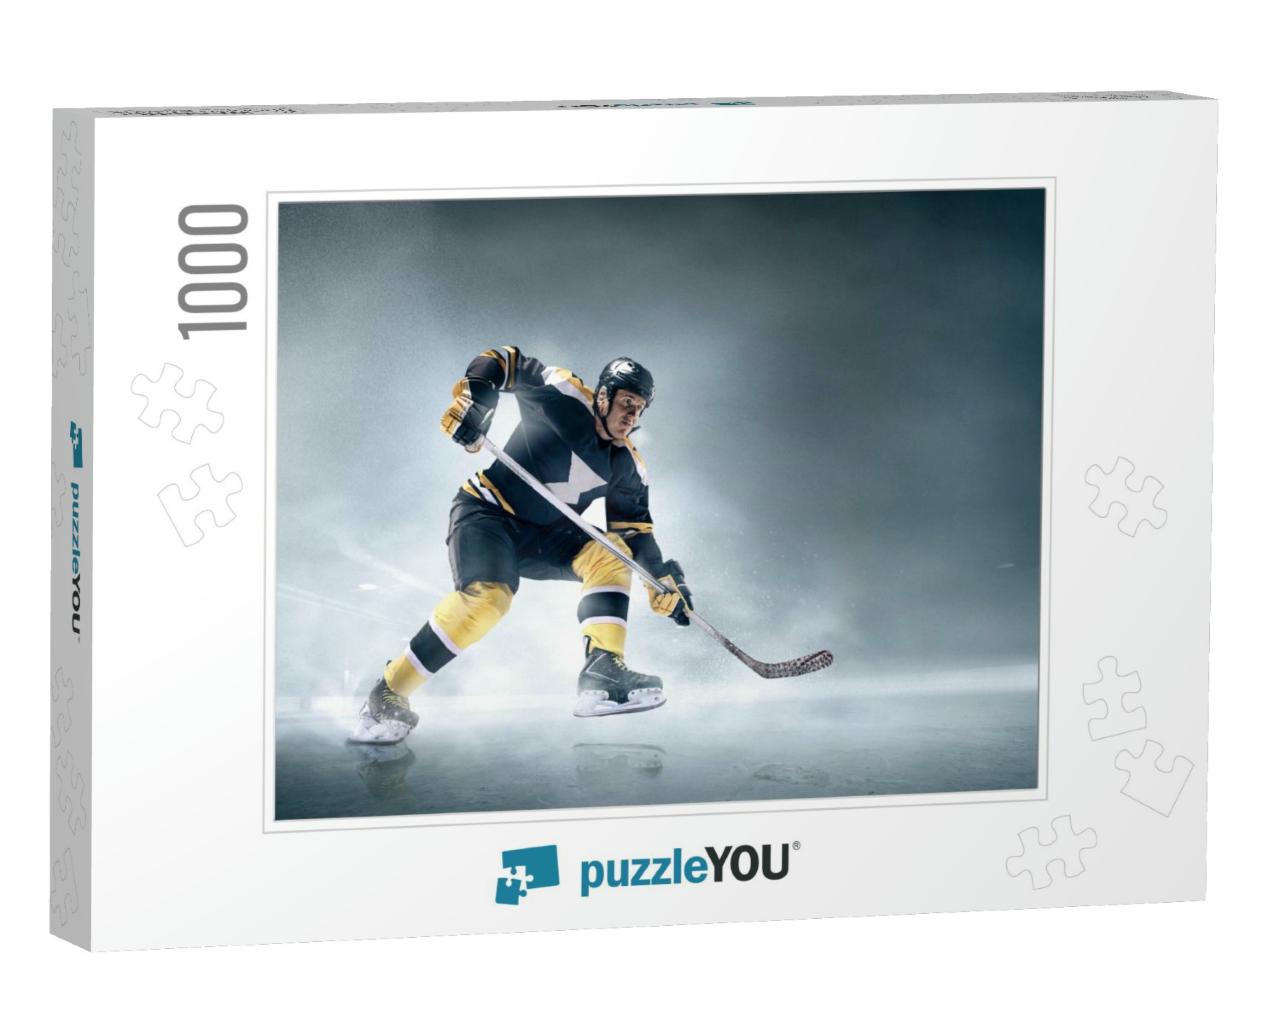 Decisive Throw of the Puck & Goal. Ice Hockey Player in A... Jigsaw Puzzle with 1000 pieces